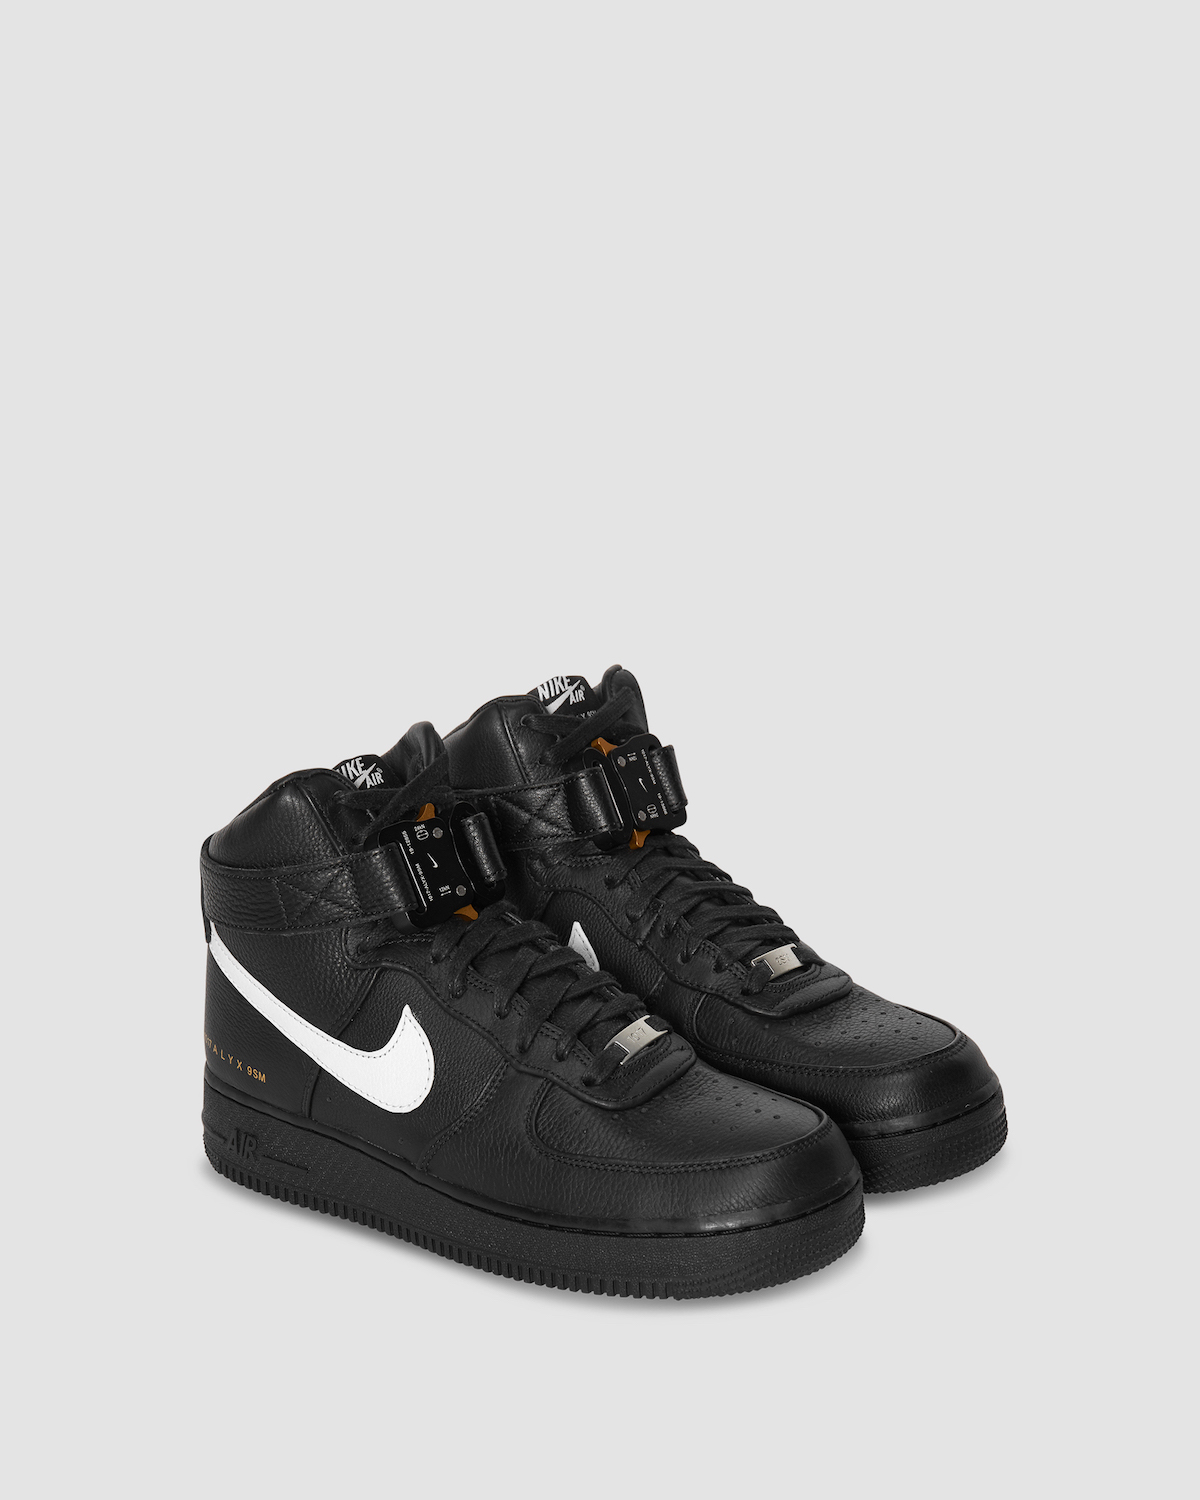 The 1017 ALYX 9SM x Nike Air Force 1 High Drops This Saturday – PAUSE ...